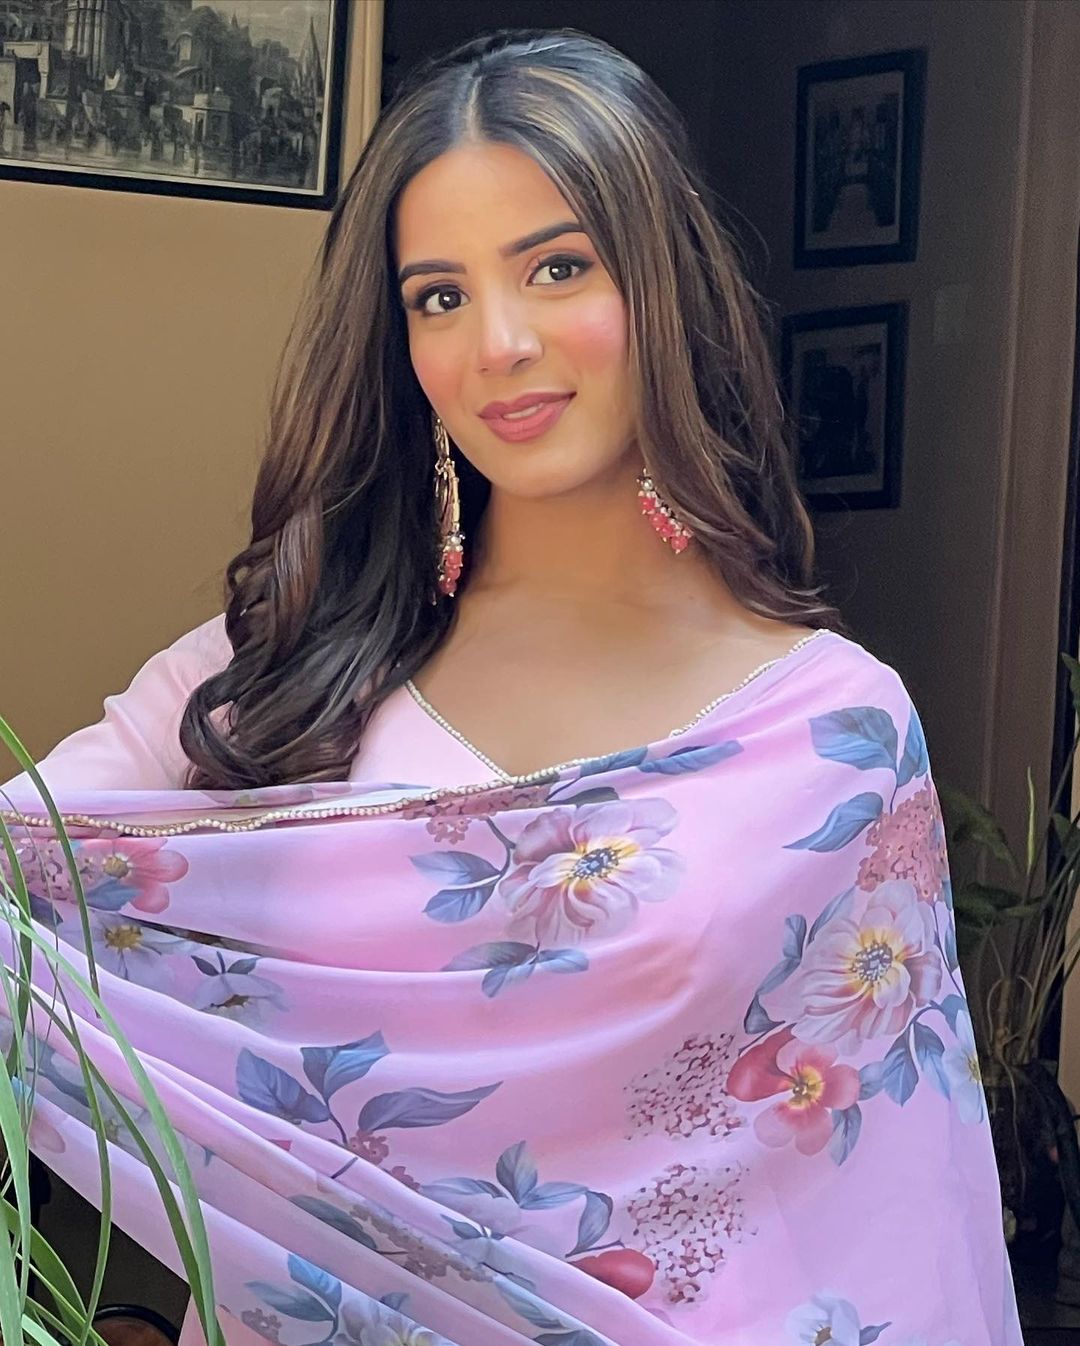 She Is Ready For A Mother-Daughter Date! Check Out The Plans Of Gorgeous Nikki Sharma On This International Women’s Day.